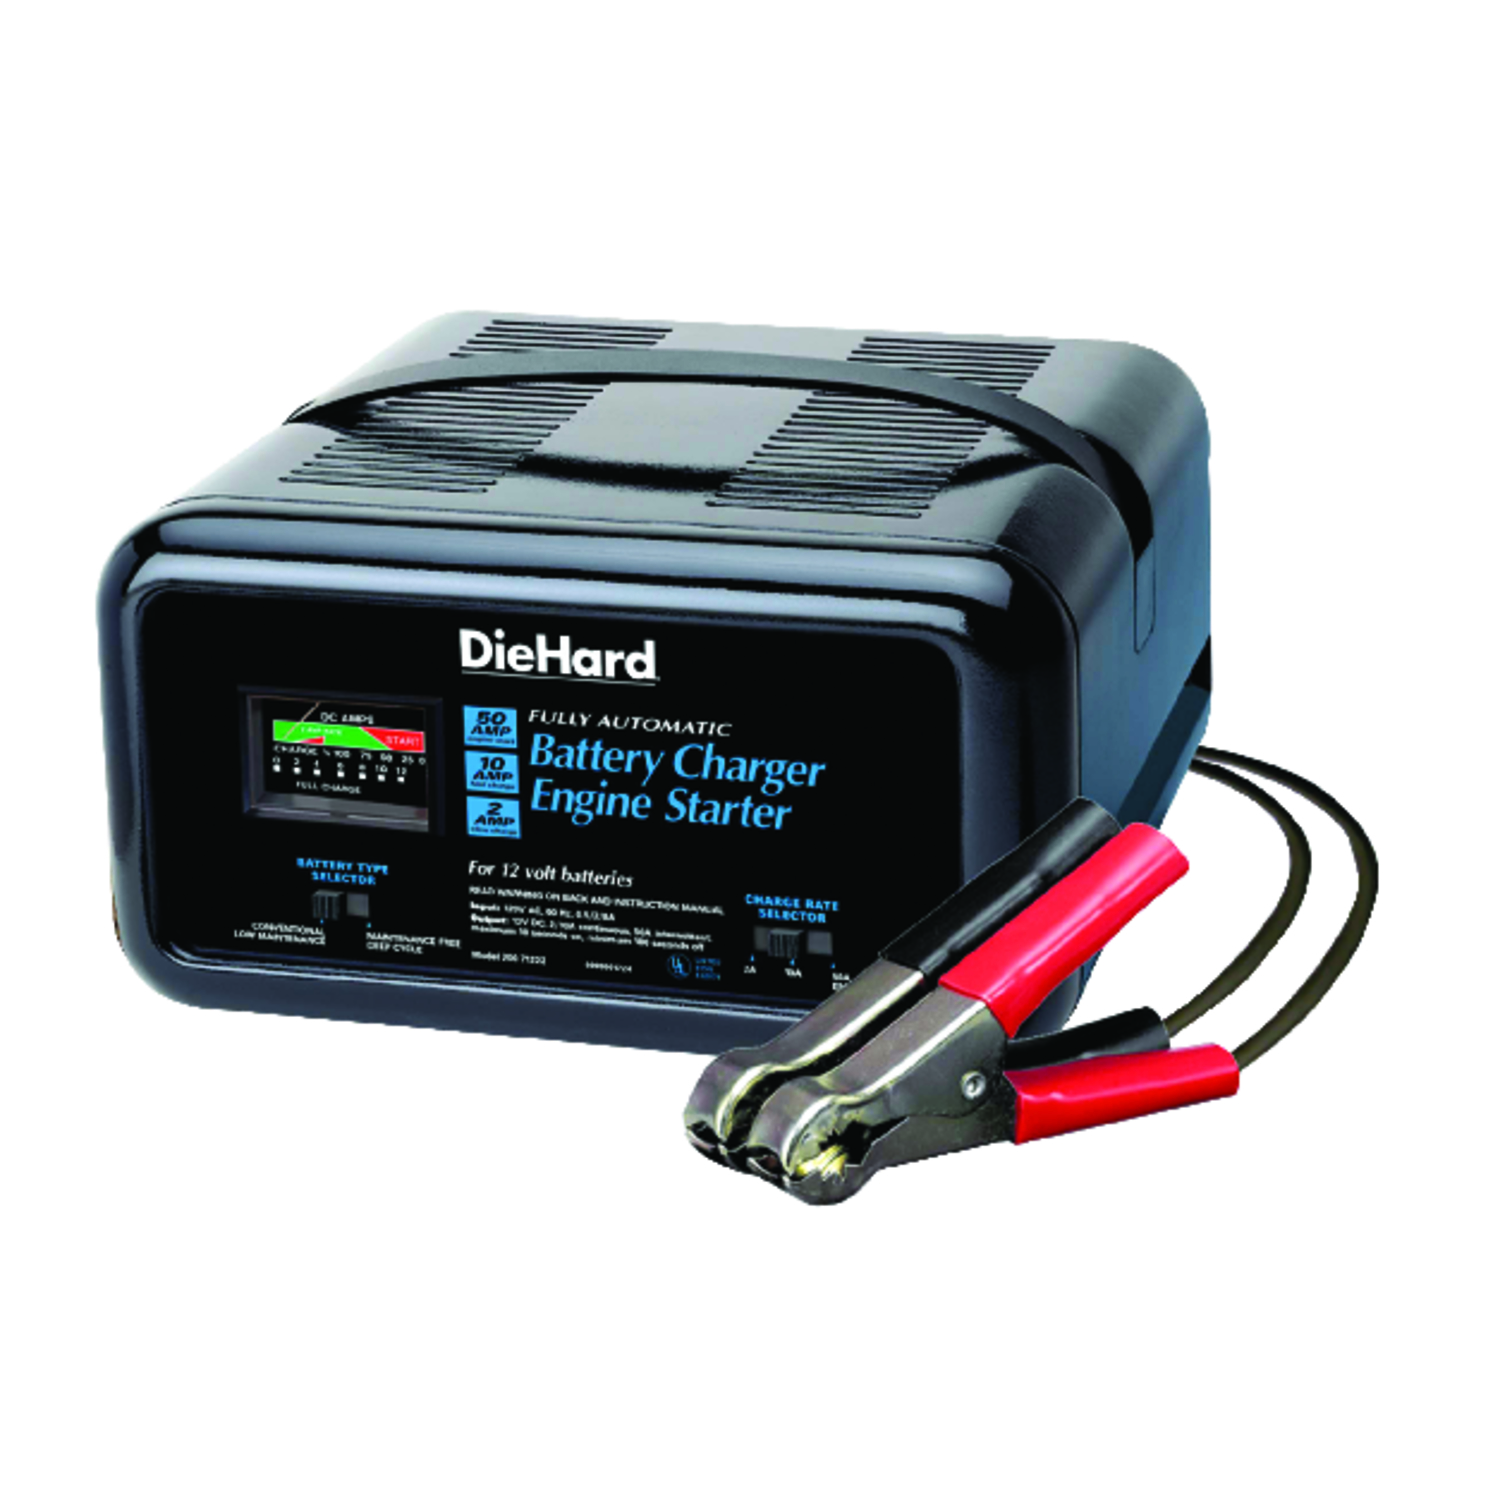 UPC 026666712224 product image for DieHard Automatic Battery Charger/Engine Starter (71222) | upcitemdb.com